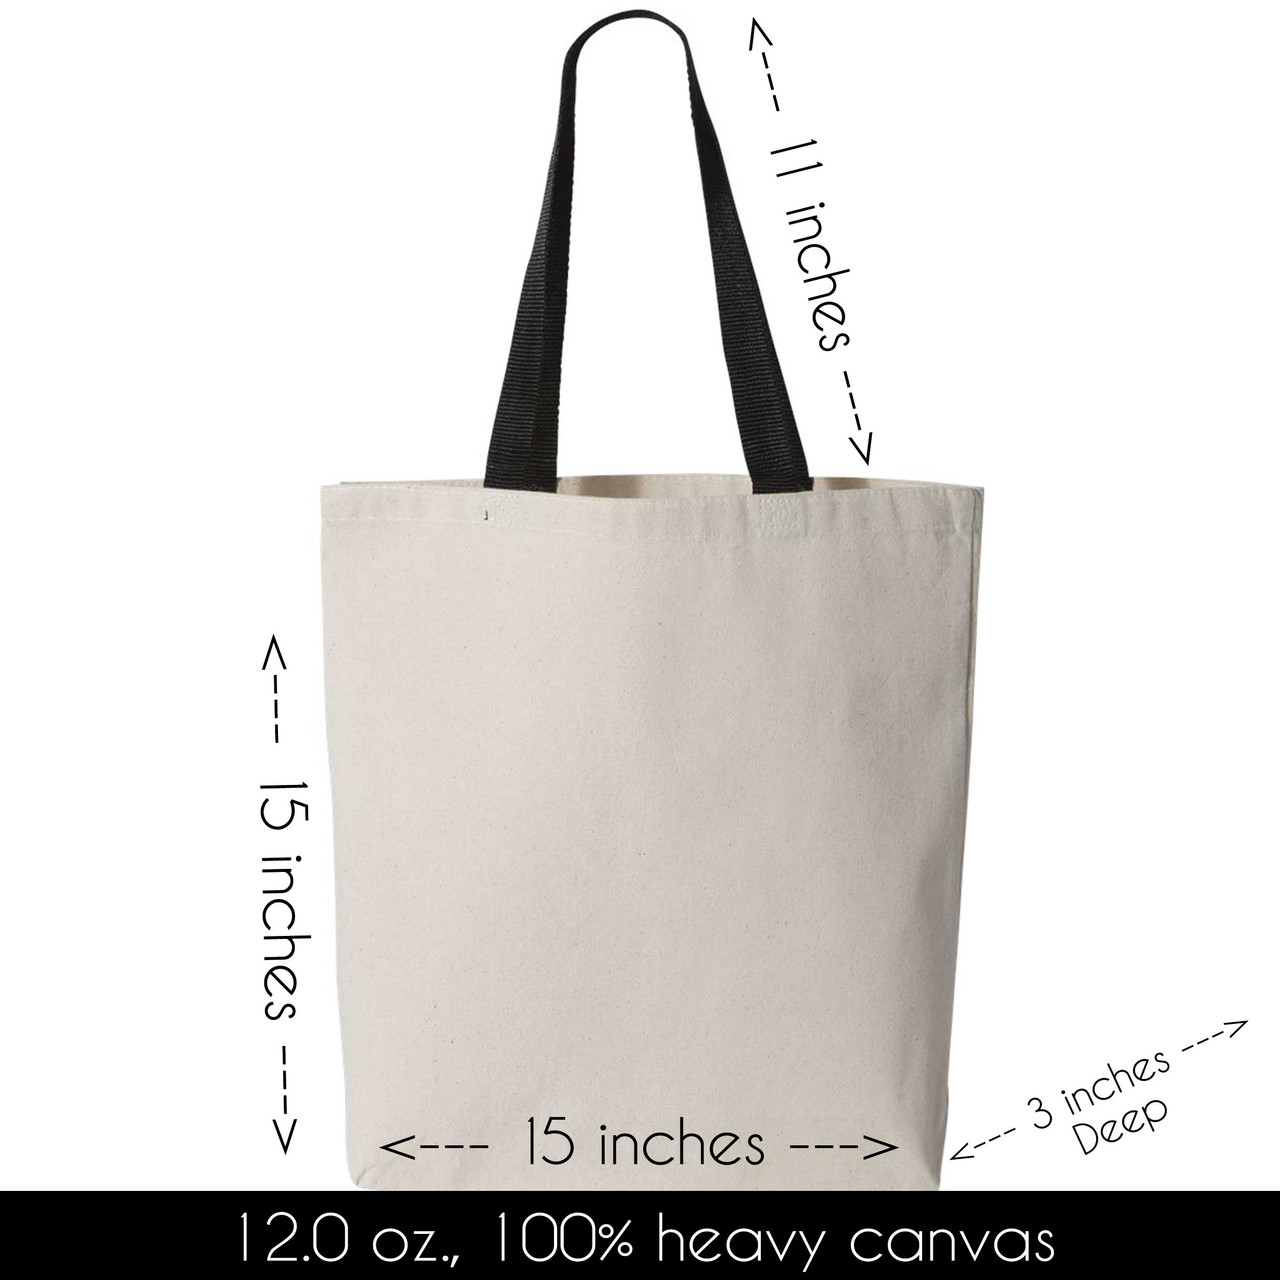 Custom Printed Tote Bag | It's Easy to Design Yours Today!